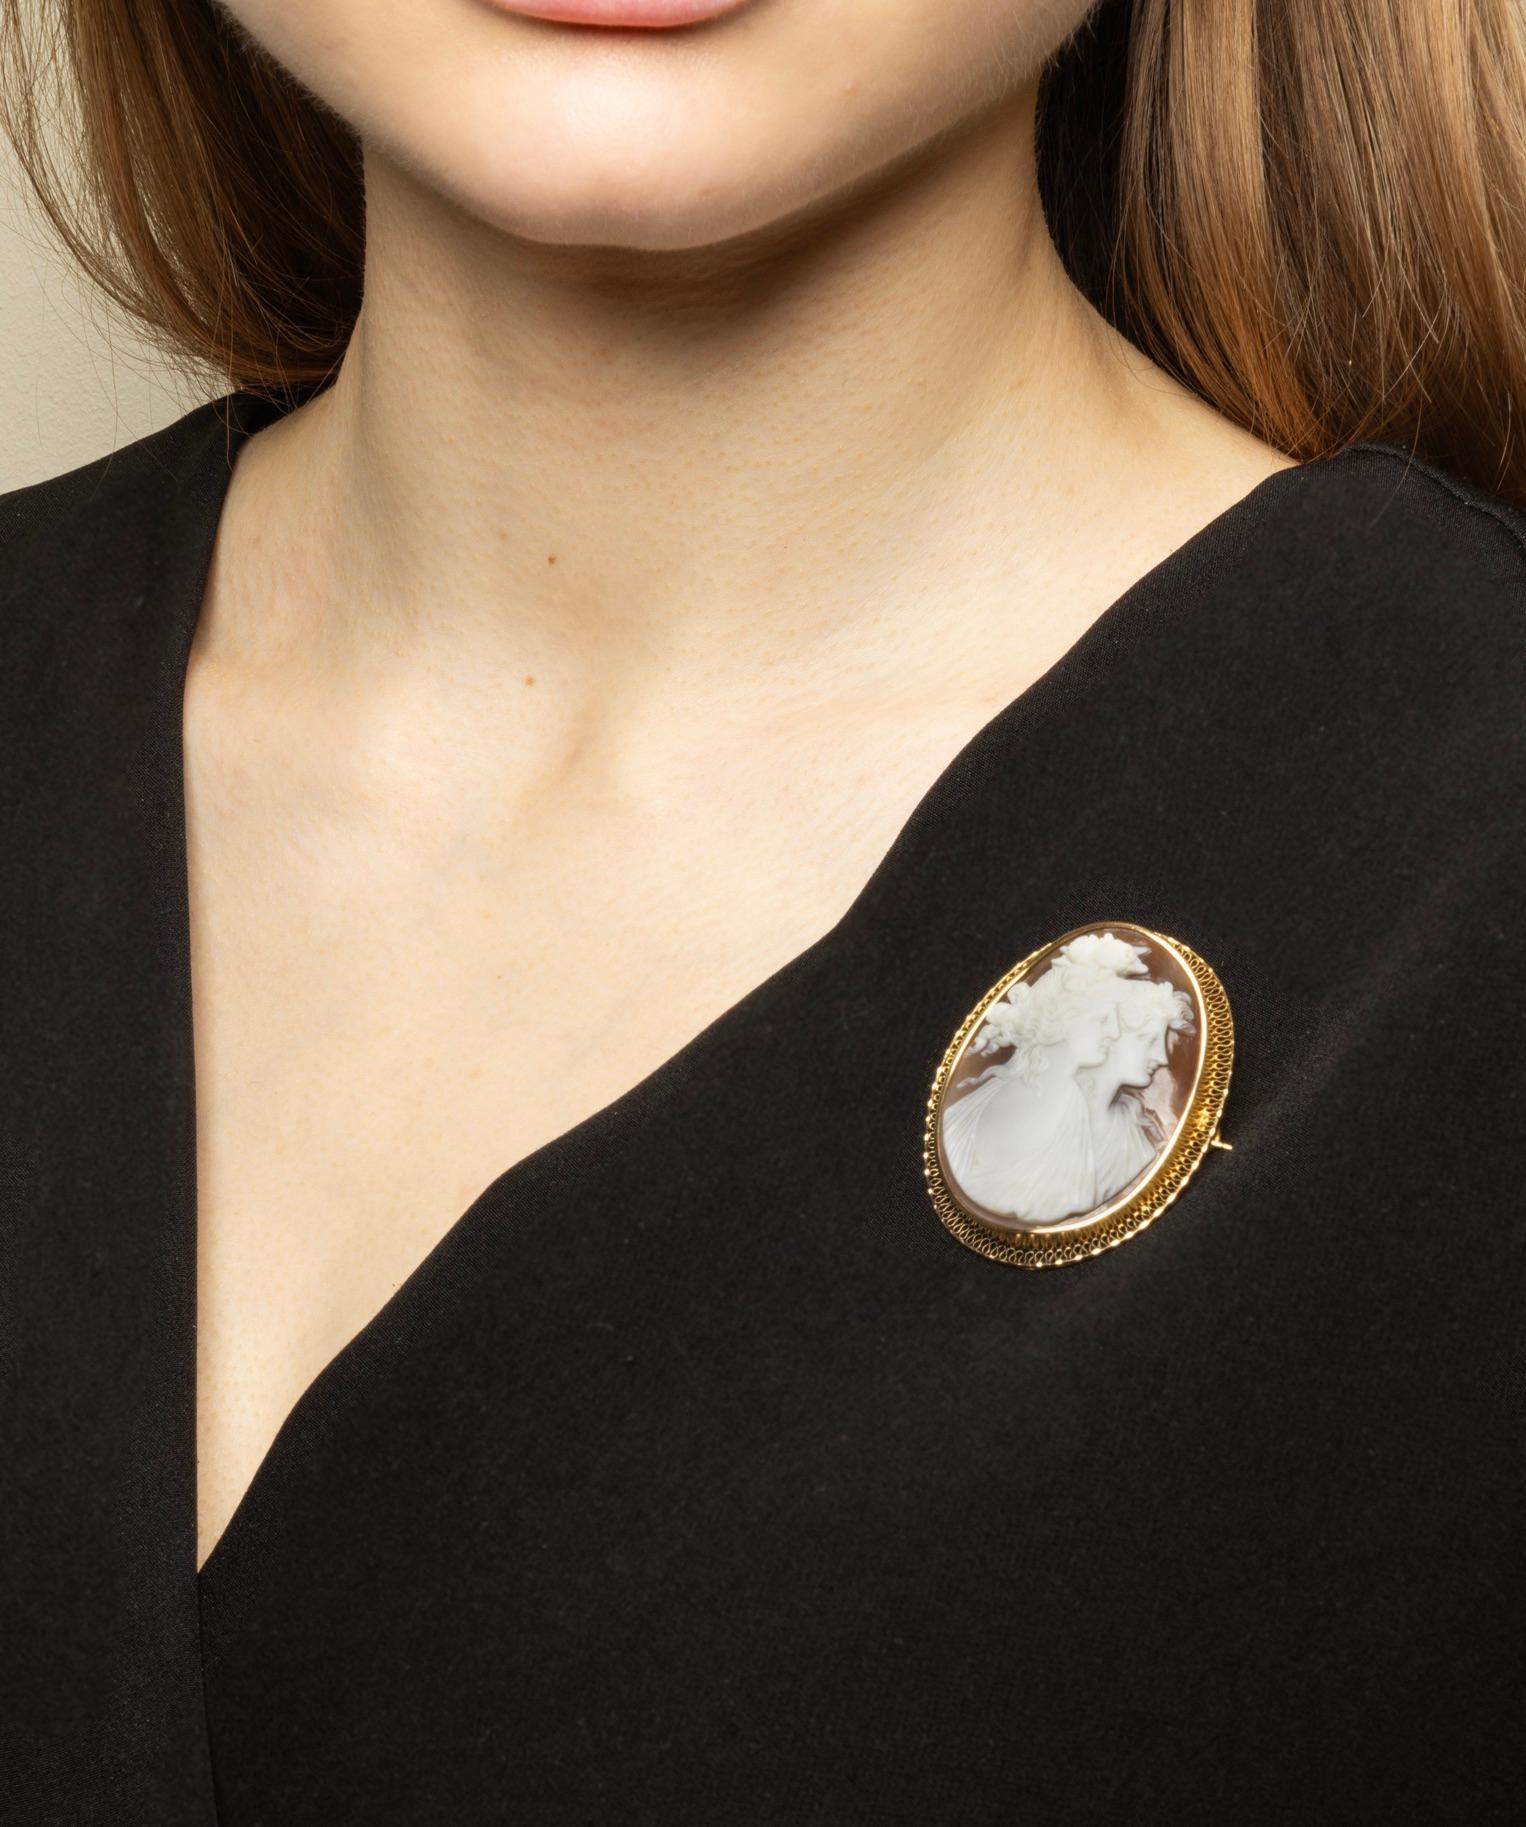 Antique brooch/pendant. 18k gold with a shell cameo made 1919 in Sweden For Sale 2